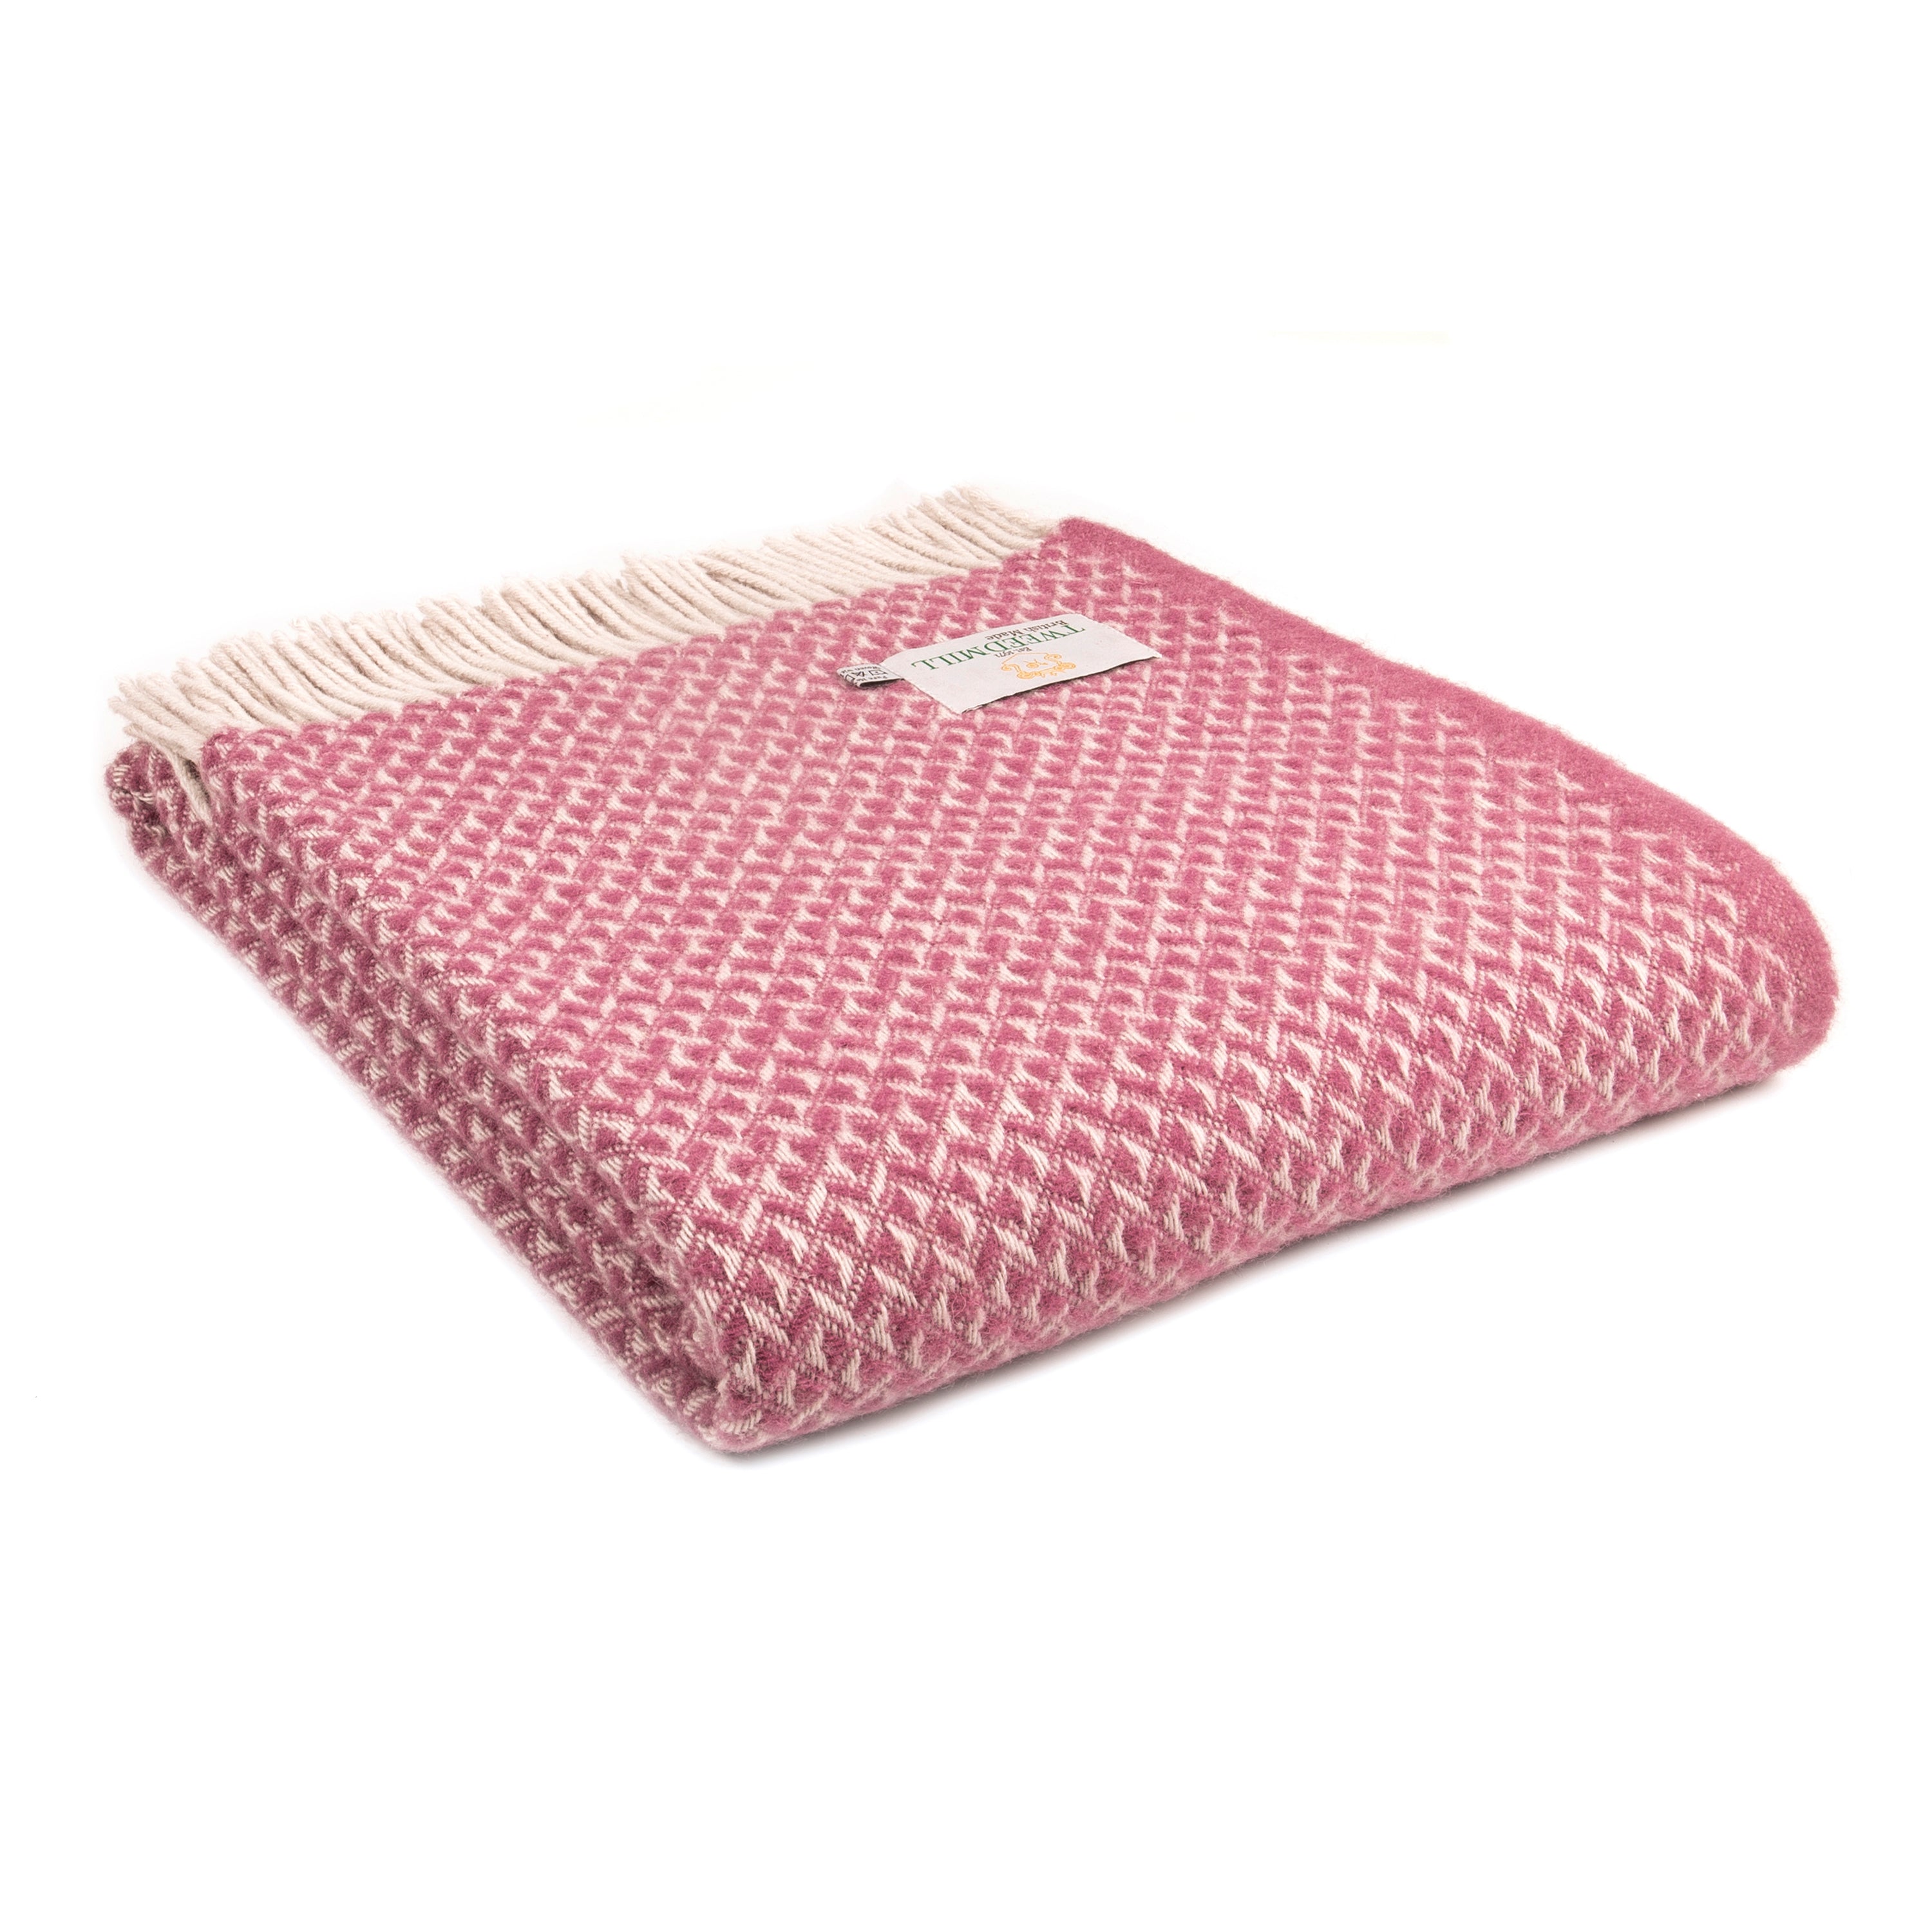 Mulberry Red 100% Pure New Wool Diamond Throw Blanket (183cm x 140cm)